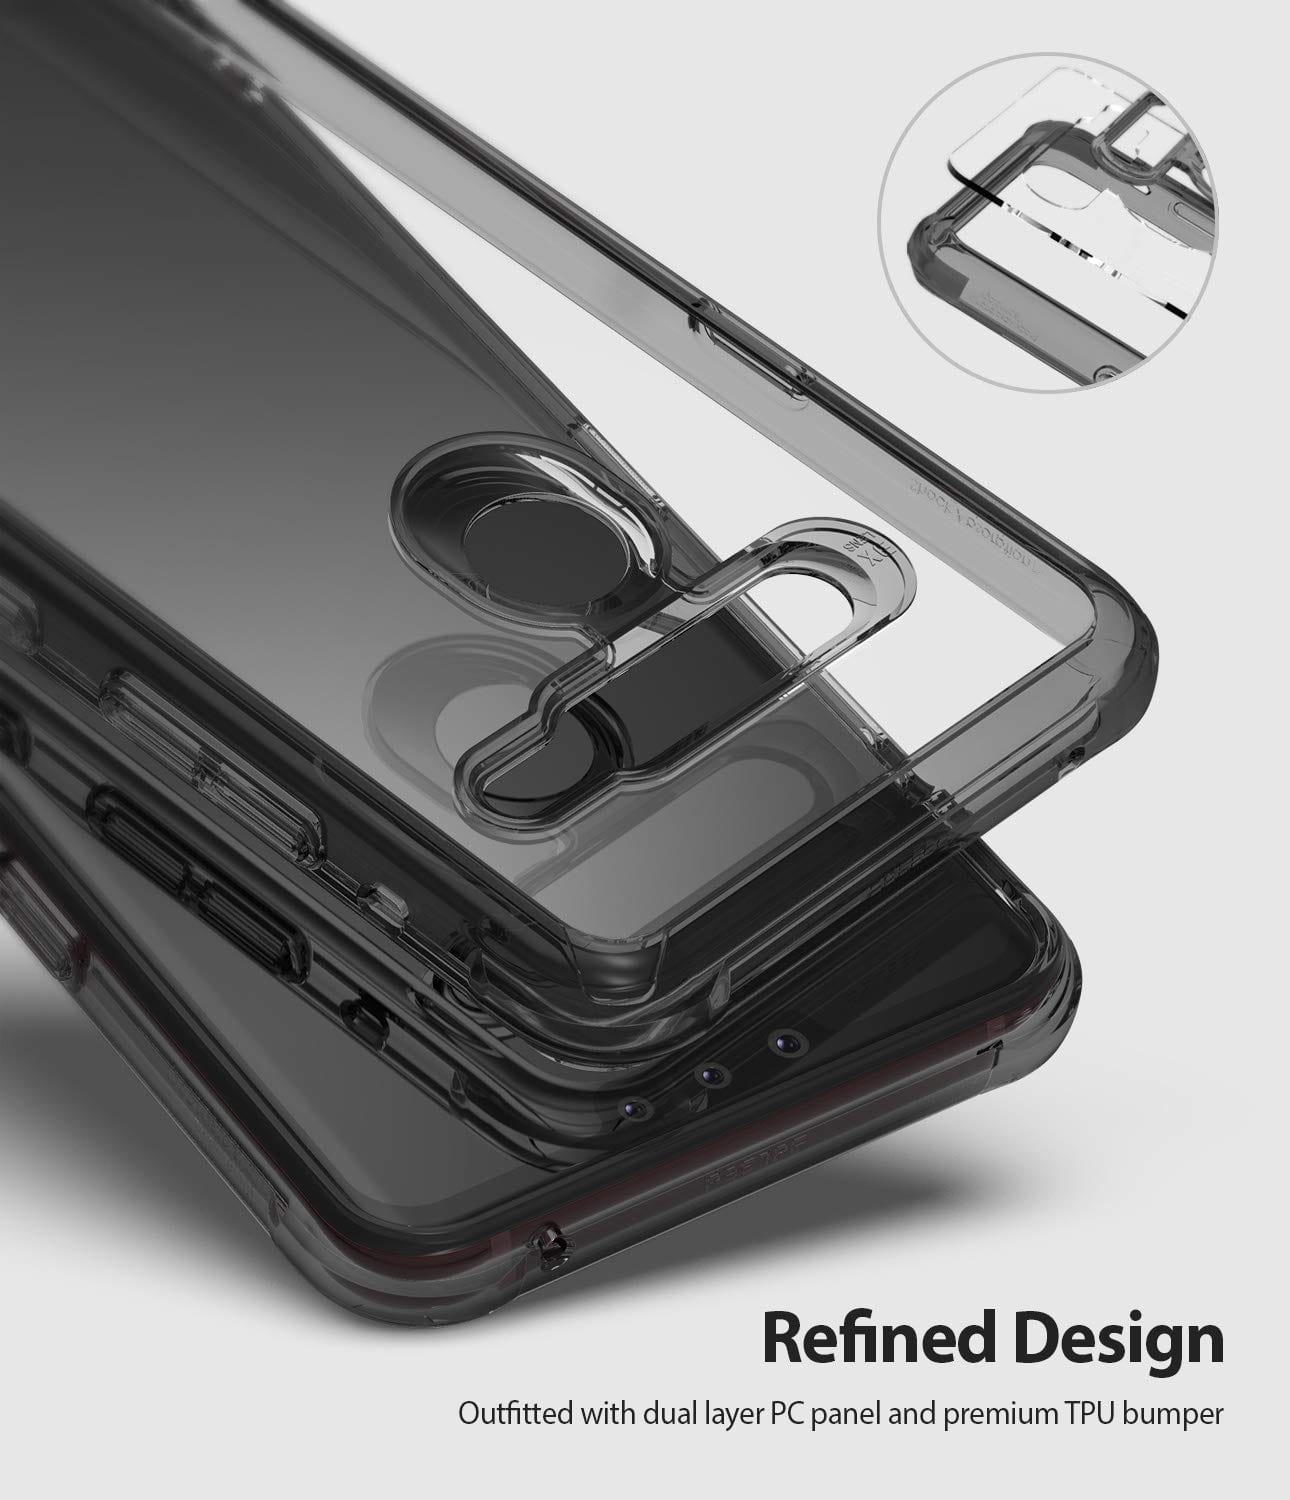 The transparent TPU bumper protects all well-rounded sides and perfectly contours all edges